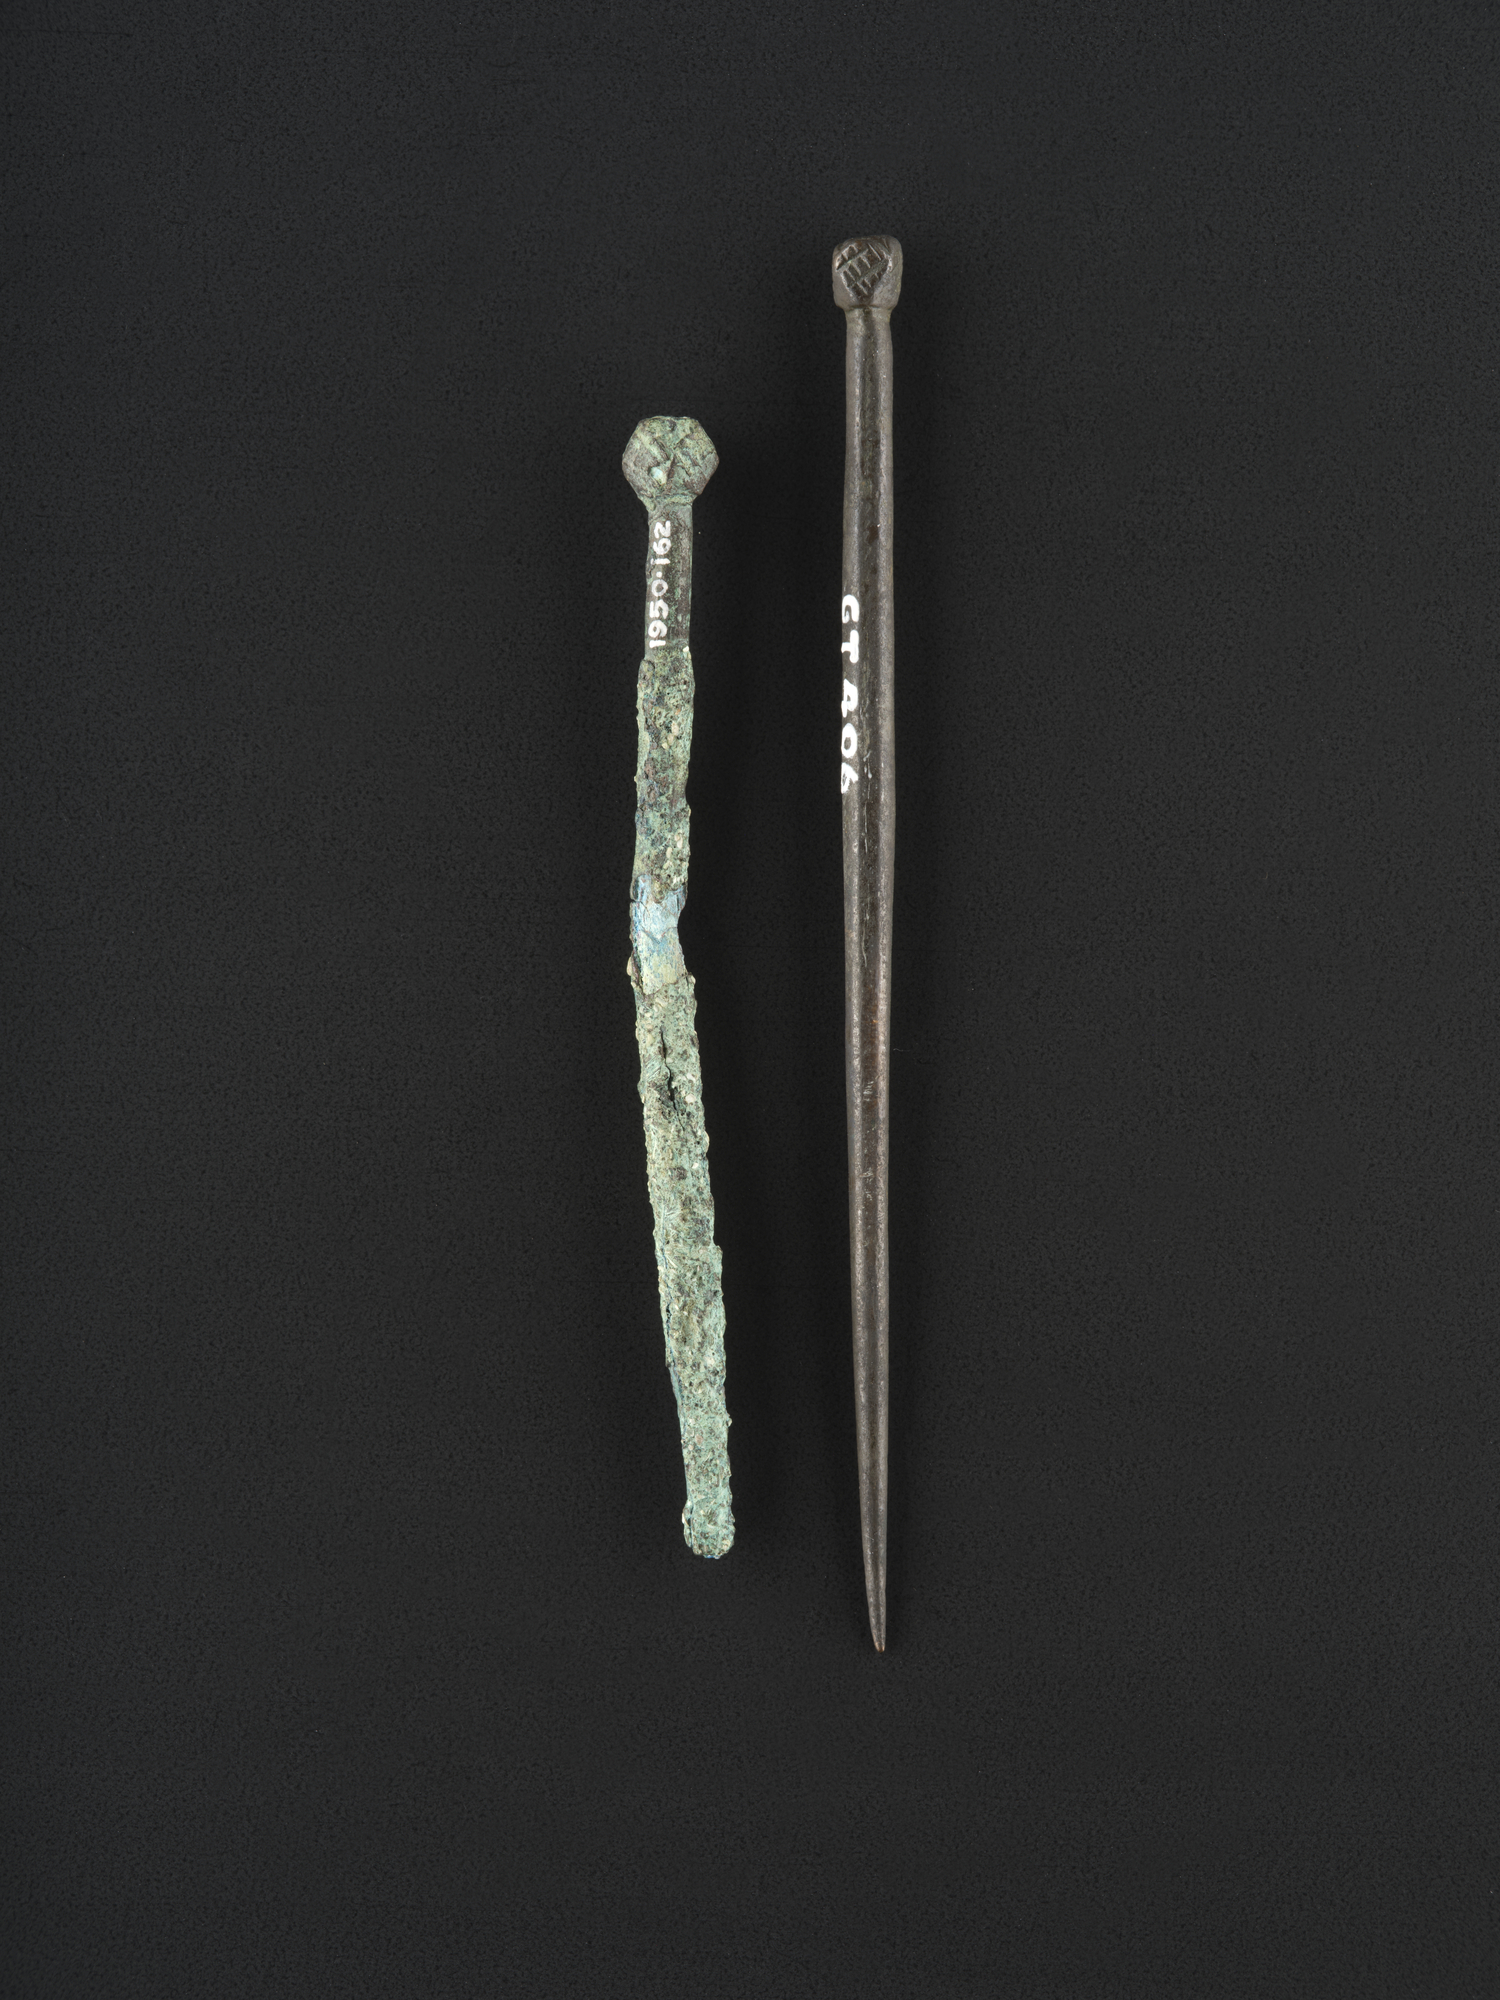 Image of Pin, from unknown location © National Museums Scotland